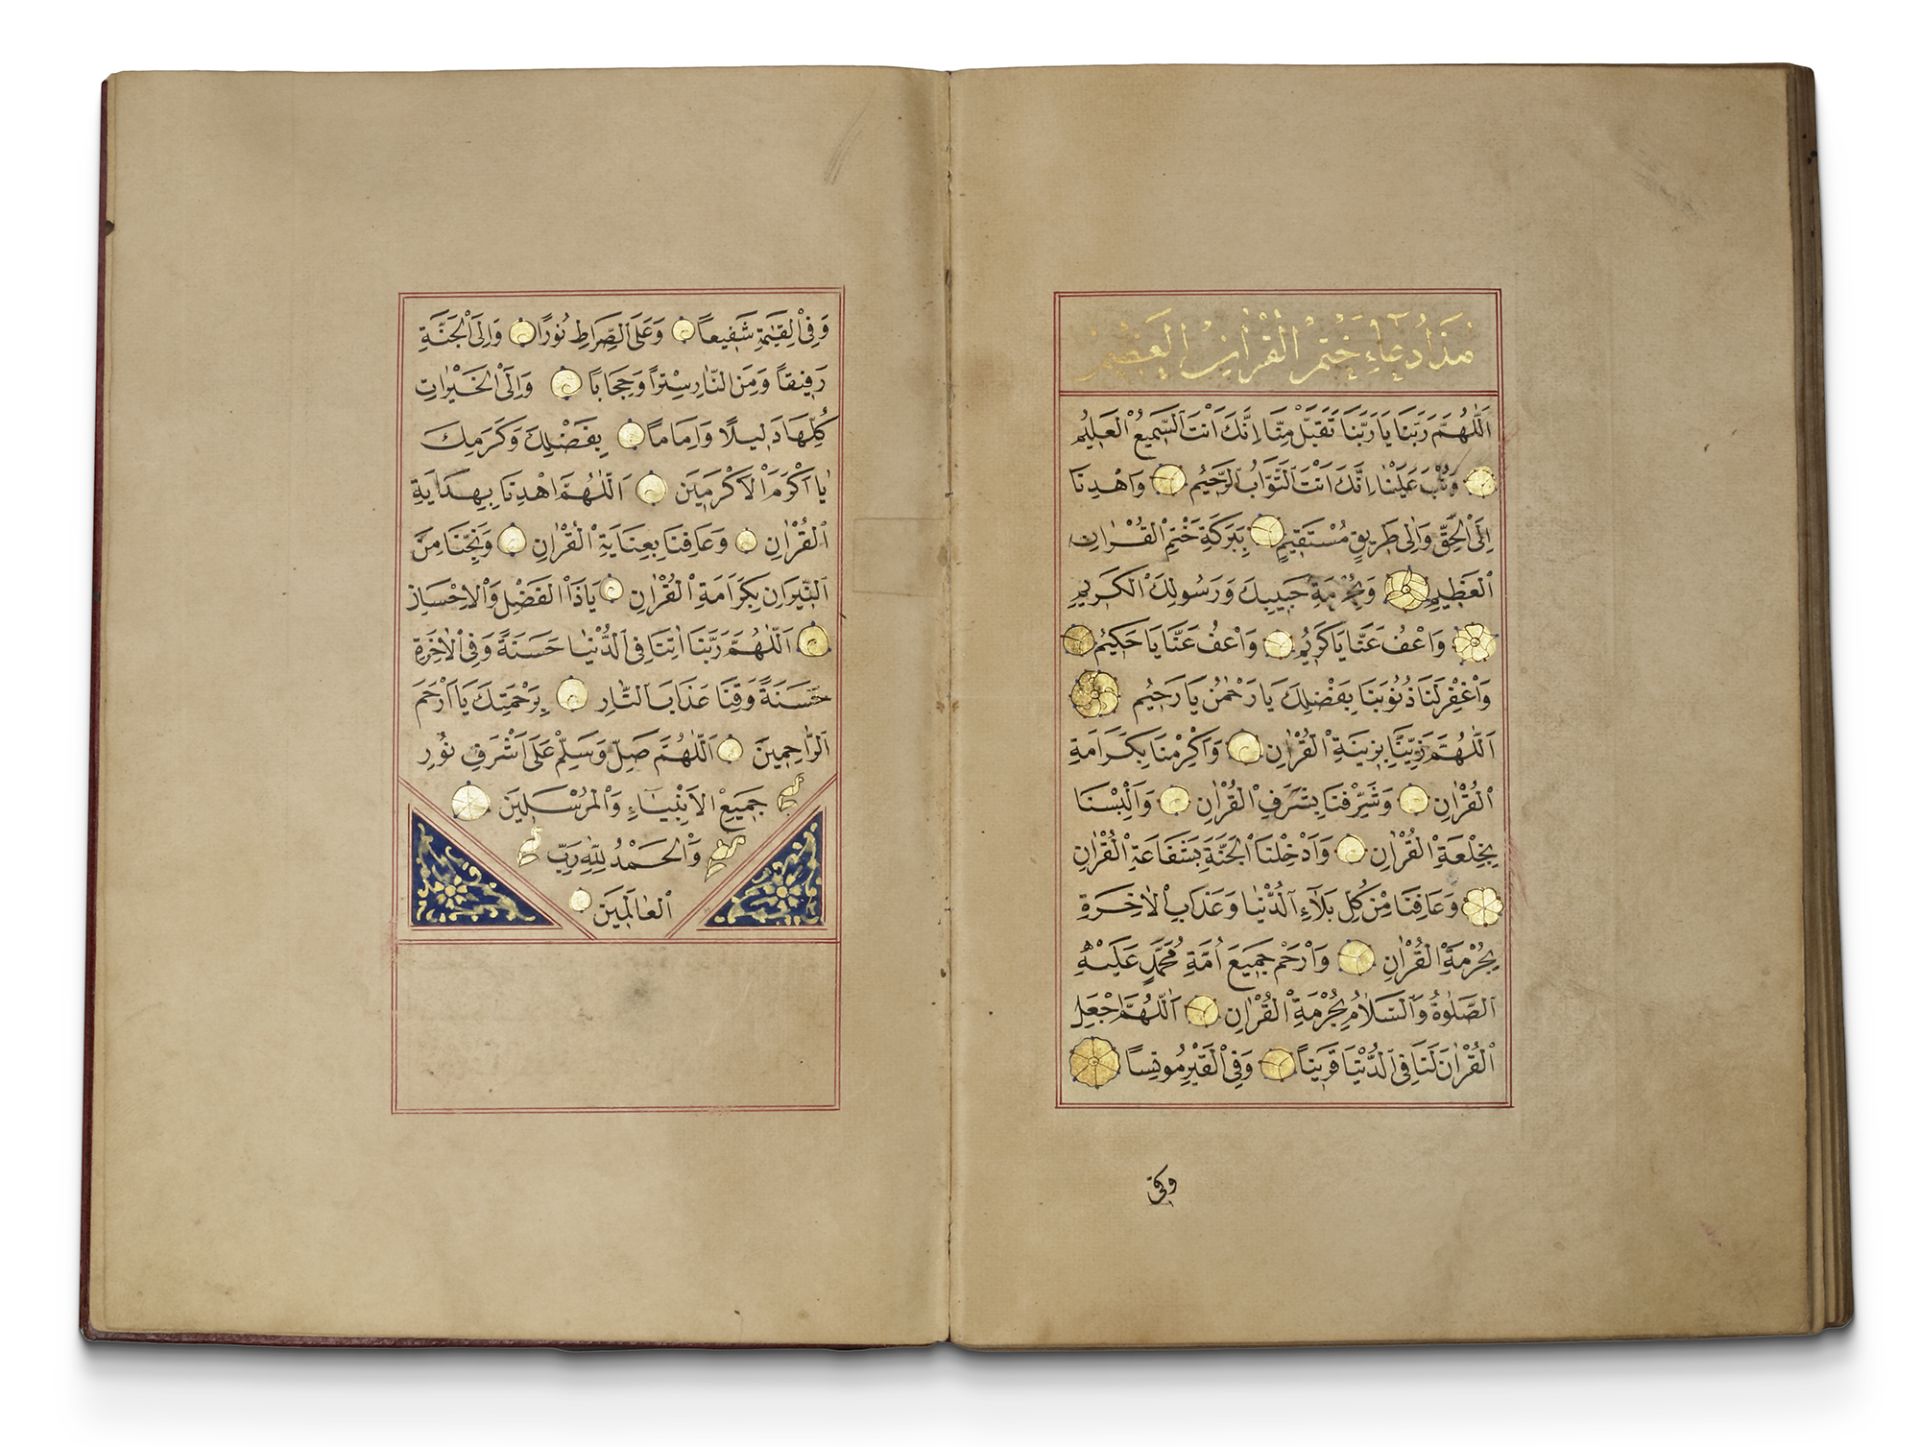 AN ILLUMINATED OTTOMAN QURAN, TURKEY WRITTEN BY HUSSAIN AL-RAJAI AND DATED 1286 AH/1869-70 AD - Image 4 of 4